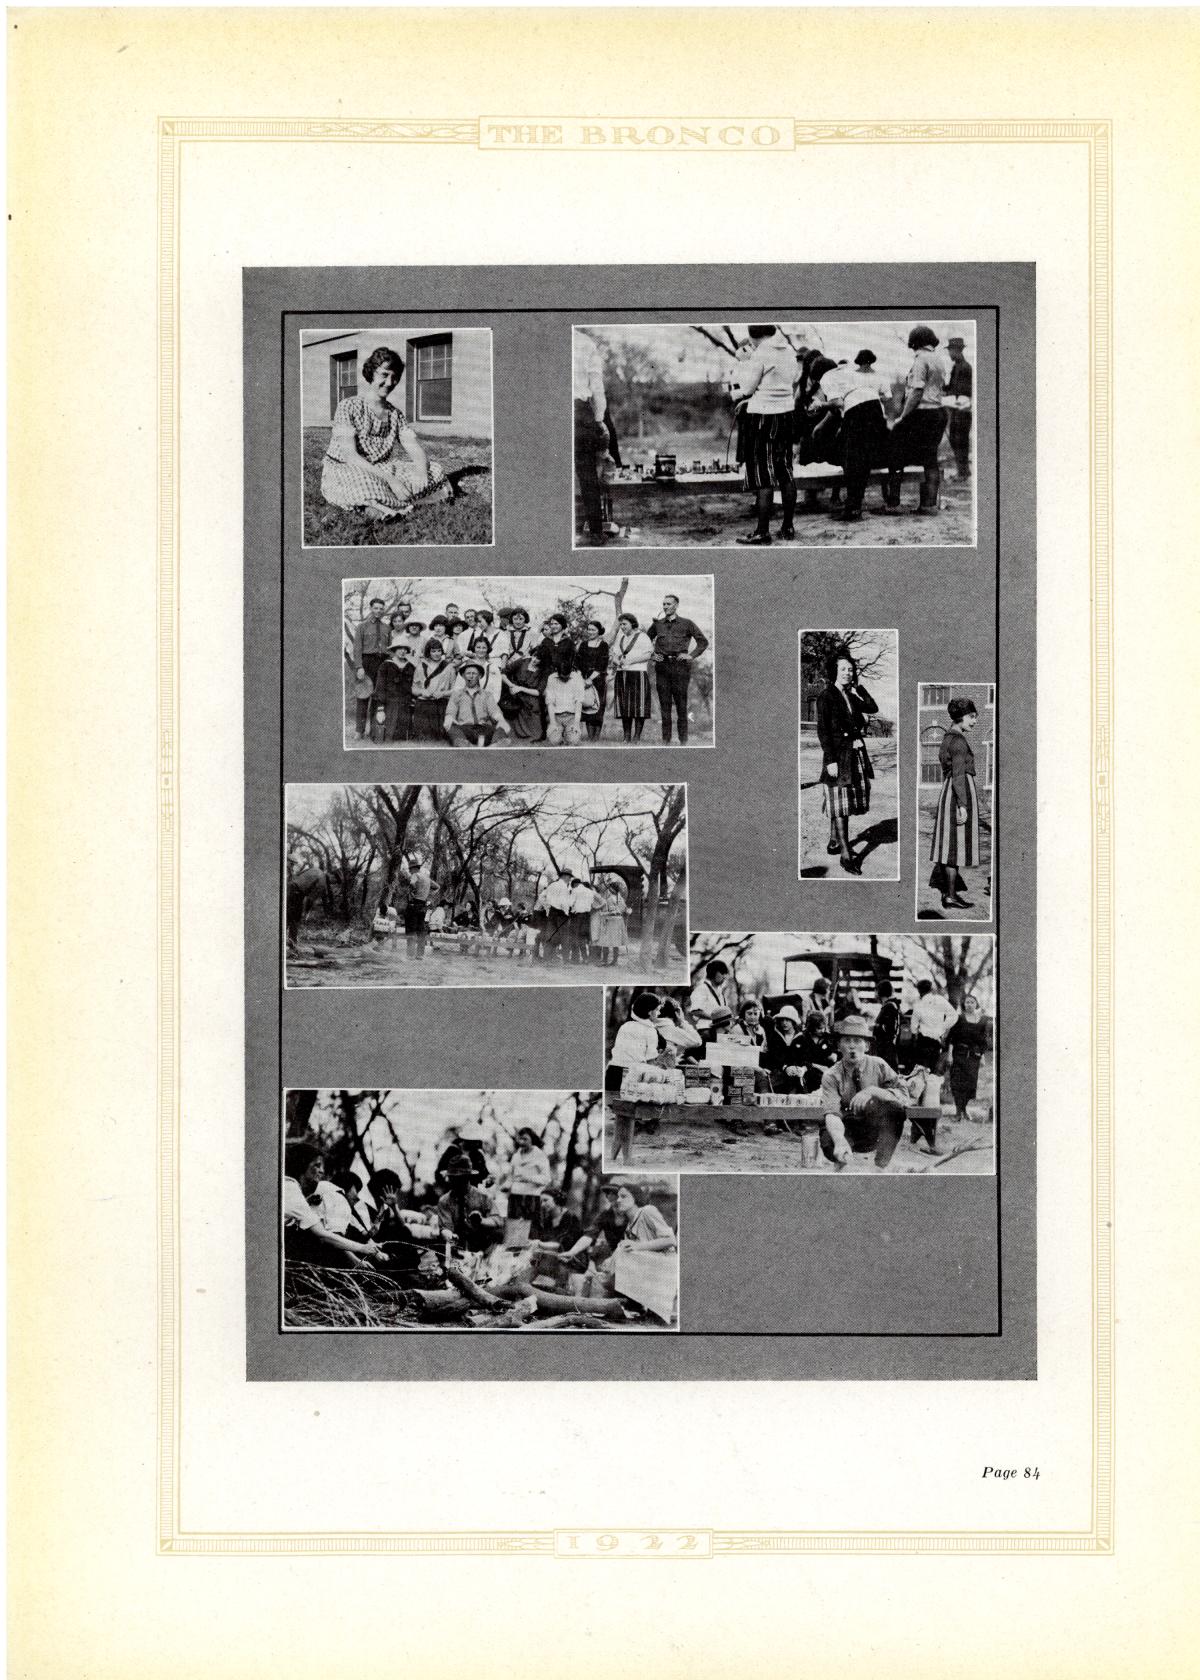 The Bronco, Yearbook of Simmons College, 1922
                                                
                                                    84
                                                